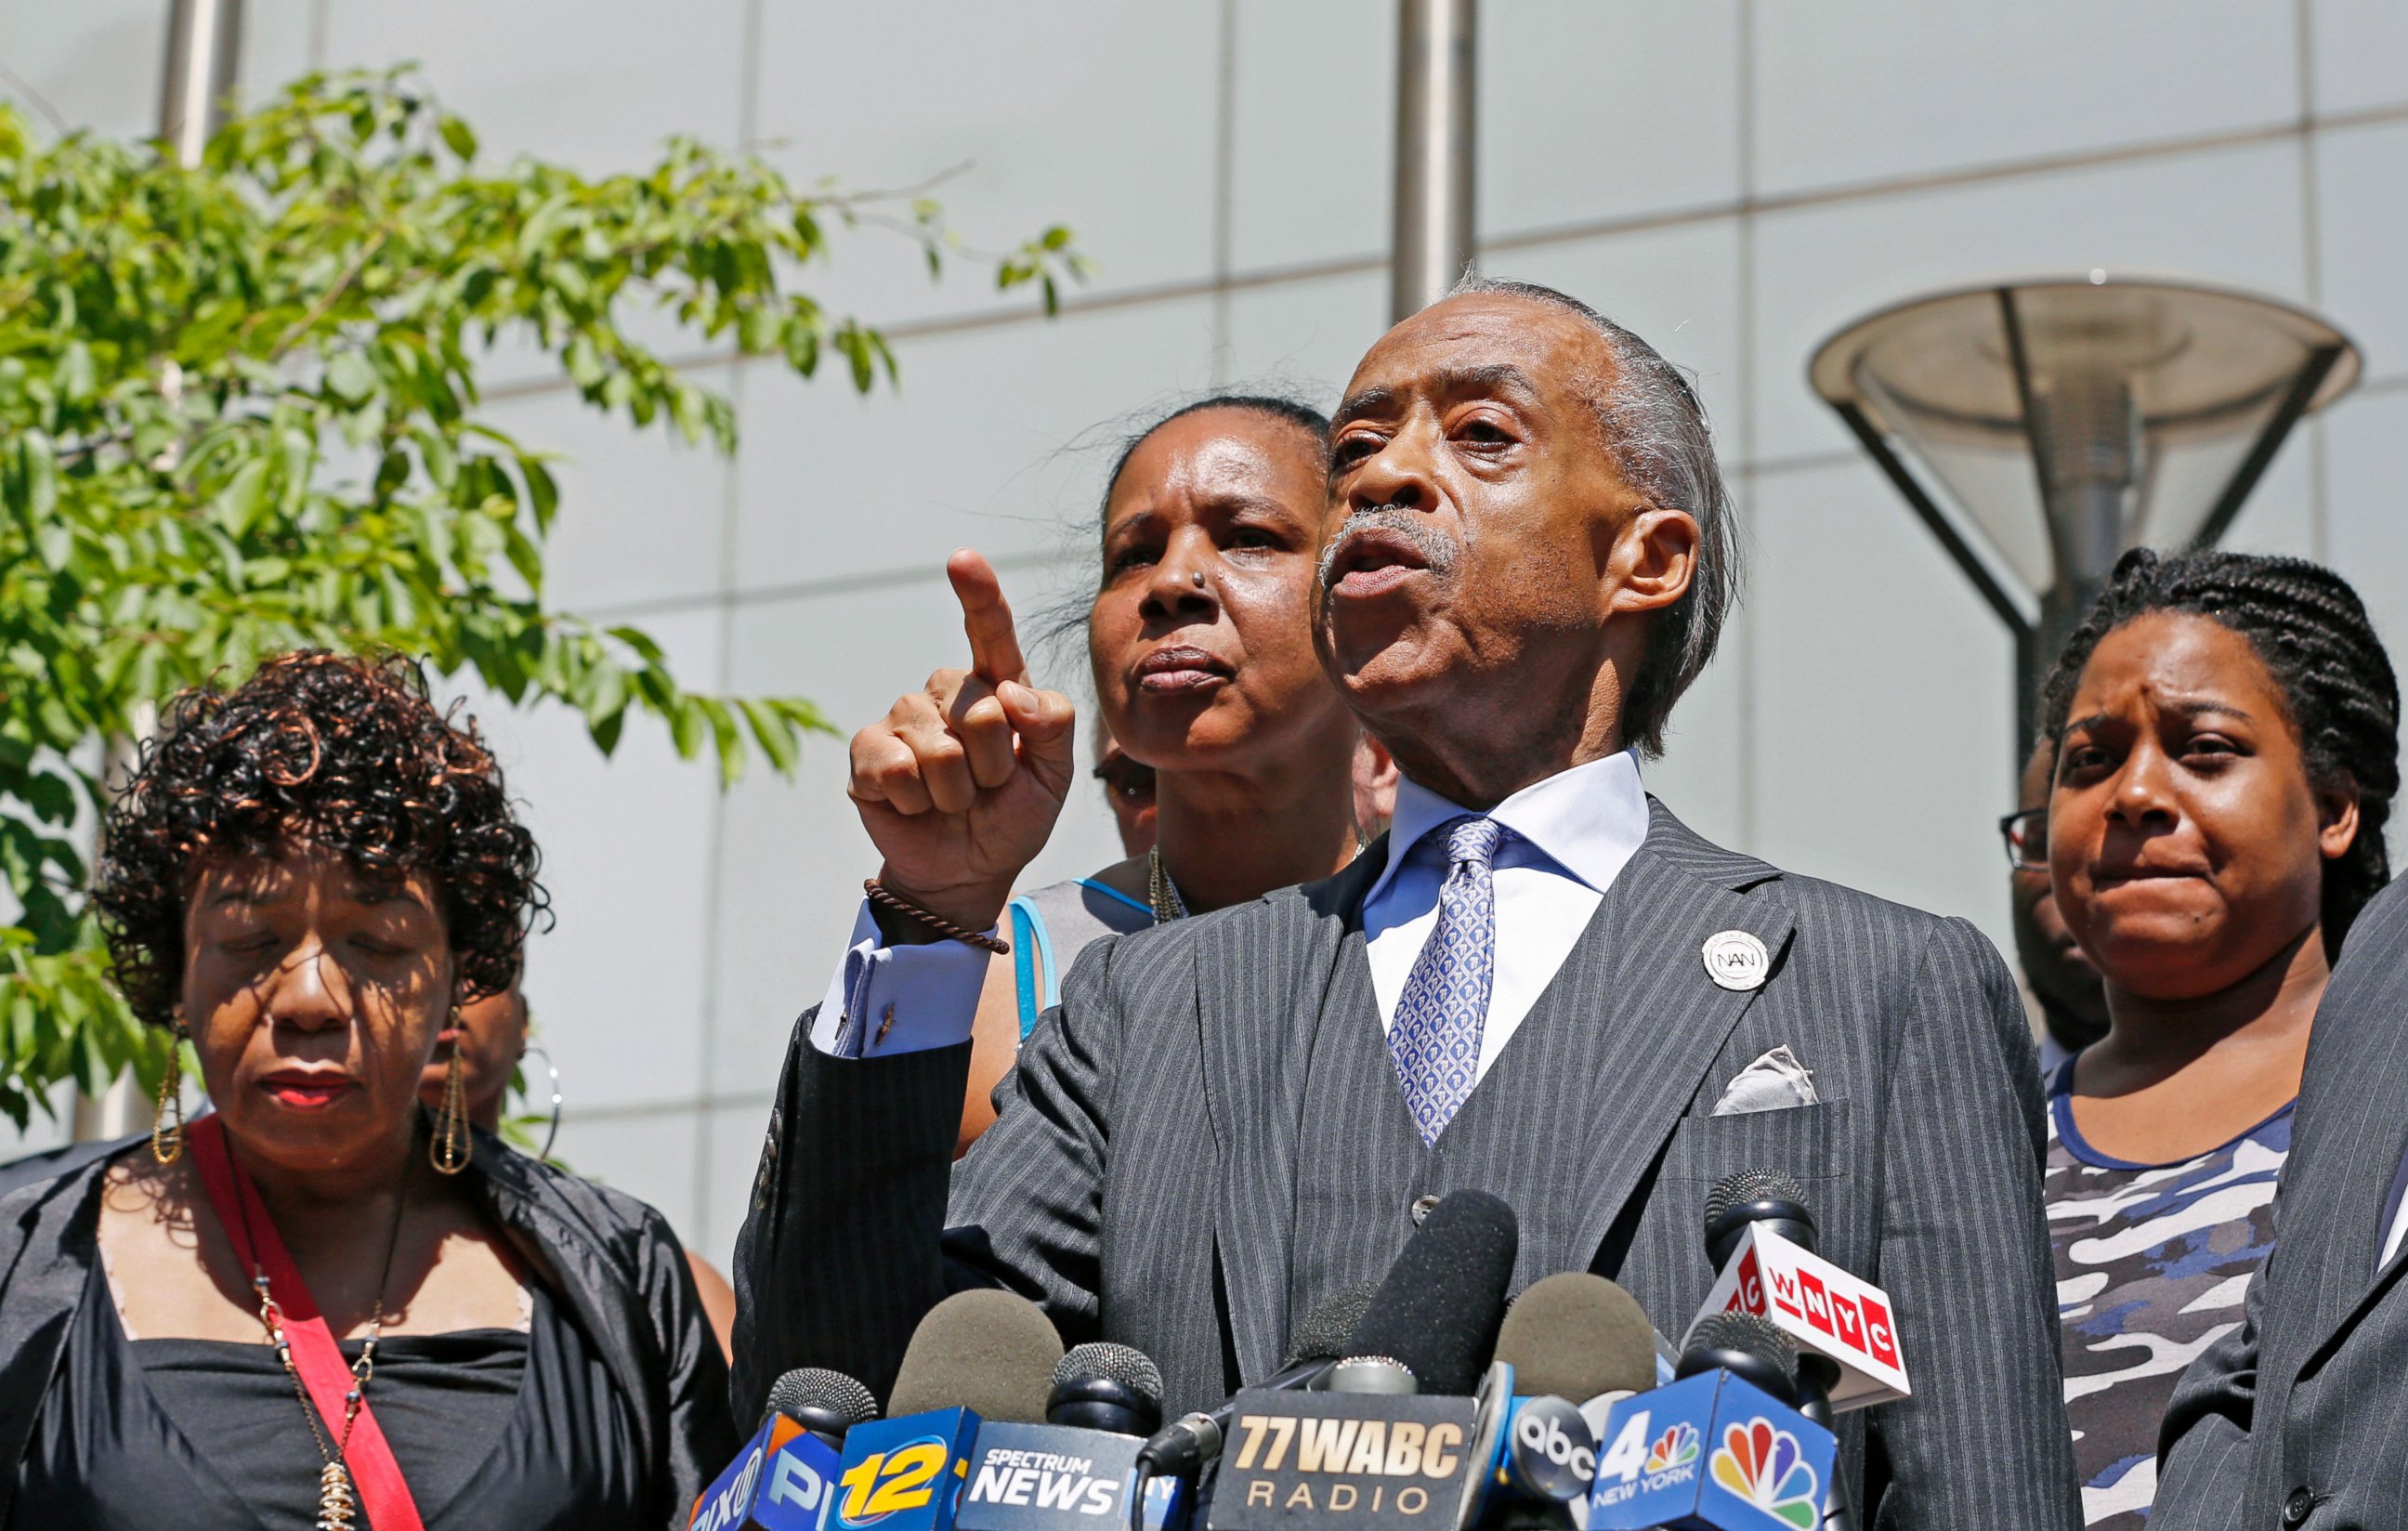 The Rev. Al Sharpton, second from right, gestures as he speaks to the media alongside members of Eric Garner's family, including Erica Garner, far right, after meeting with Department of Justice officials, Wednesday, June 21, 2017, in New York.